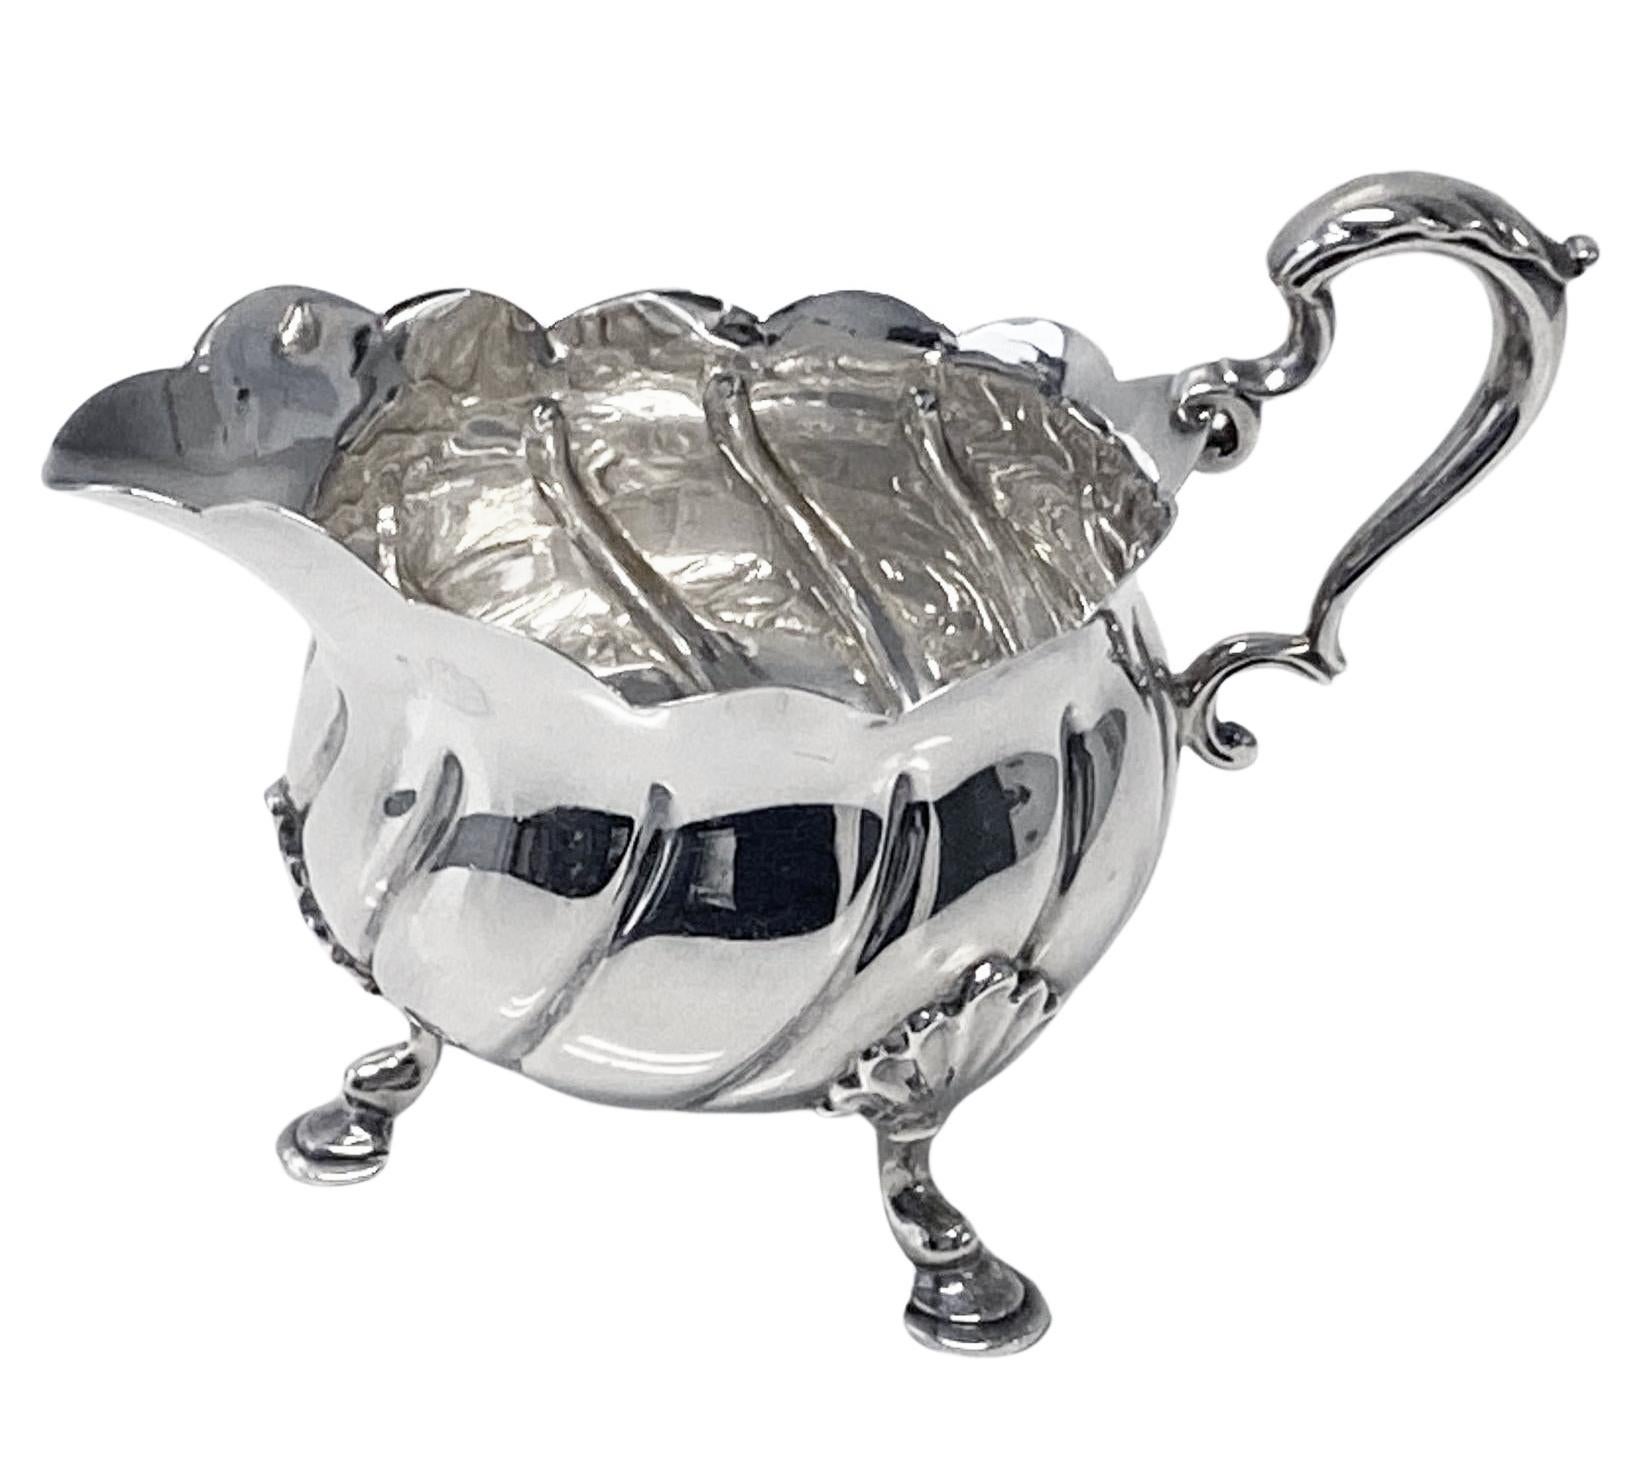 Antique Silver Cream Jug London 1899 Messrs Barnard. The jug on on three shell knuckle mask feet, swirl design surround body, scalloped everted rim, acanthus foliate capped double scroll handle. Handle to spout : 4.25 inches. Width: 2.50 inches.